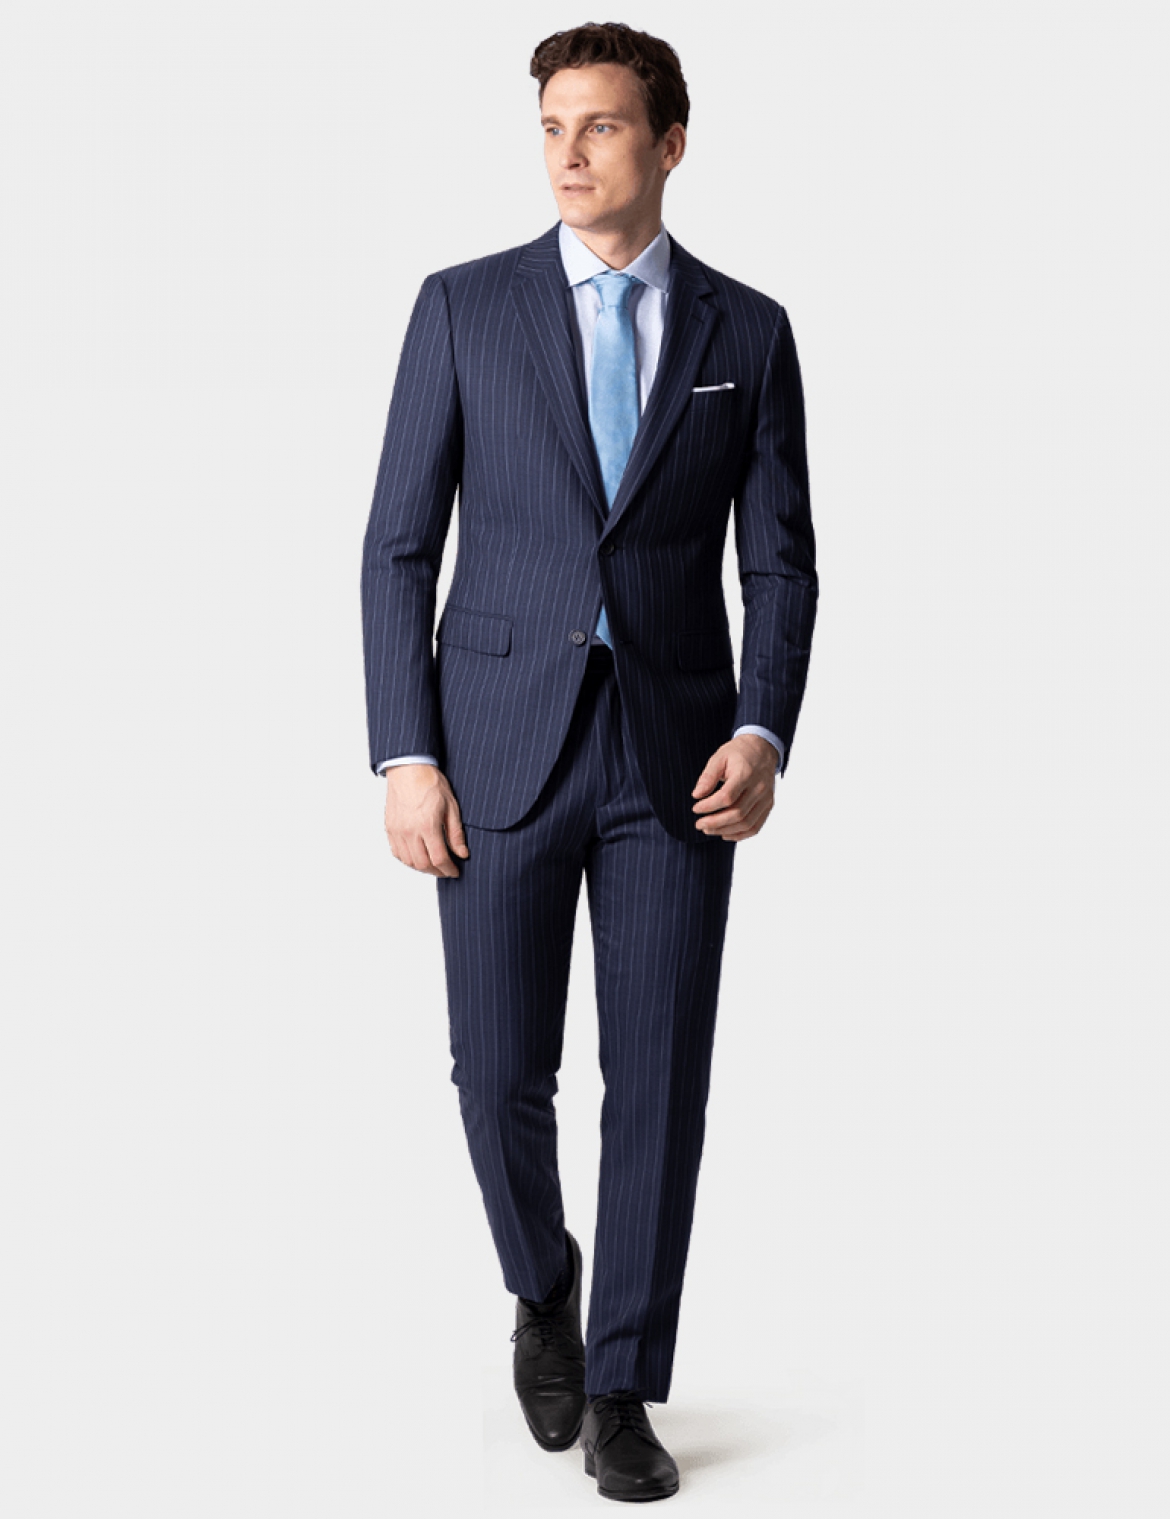 Tailor Made Striped Suit Men: Blazer And Pants Set With Double Breasted  Pinstripe For Formal Business And Casual Parties From Walterruby, $121.78 |  DHgate.Com